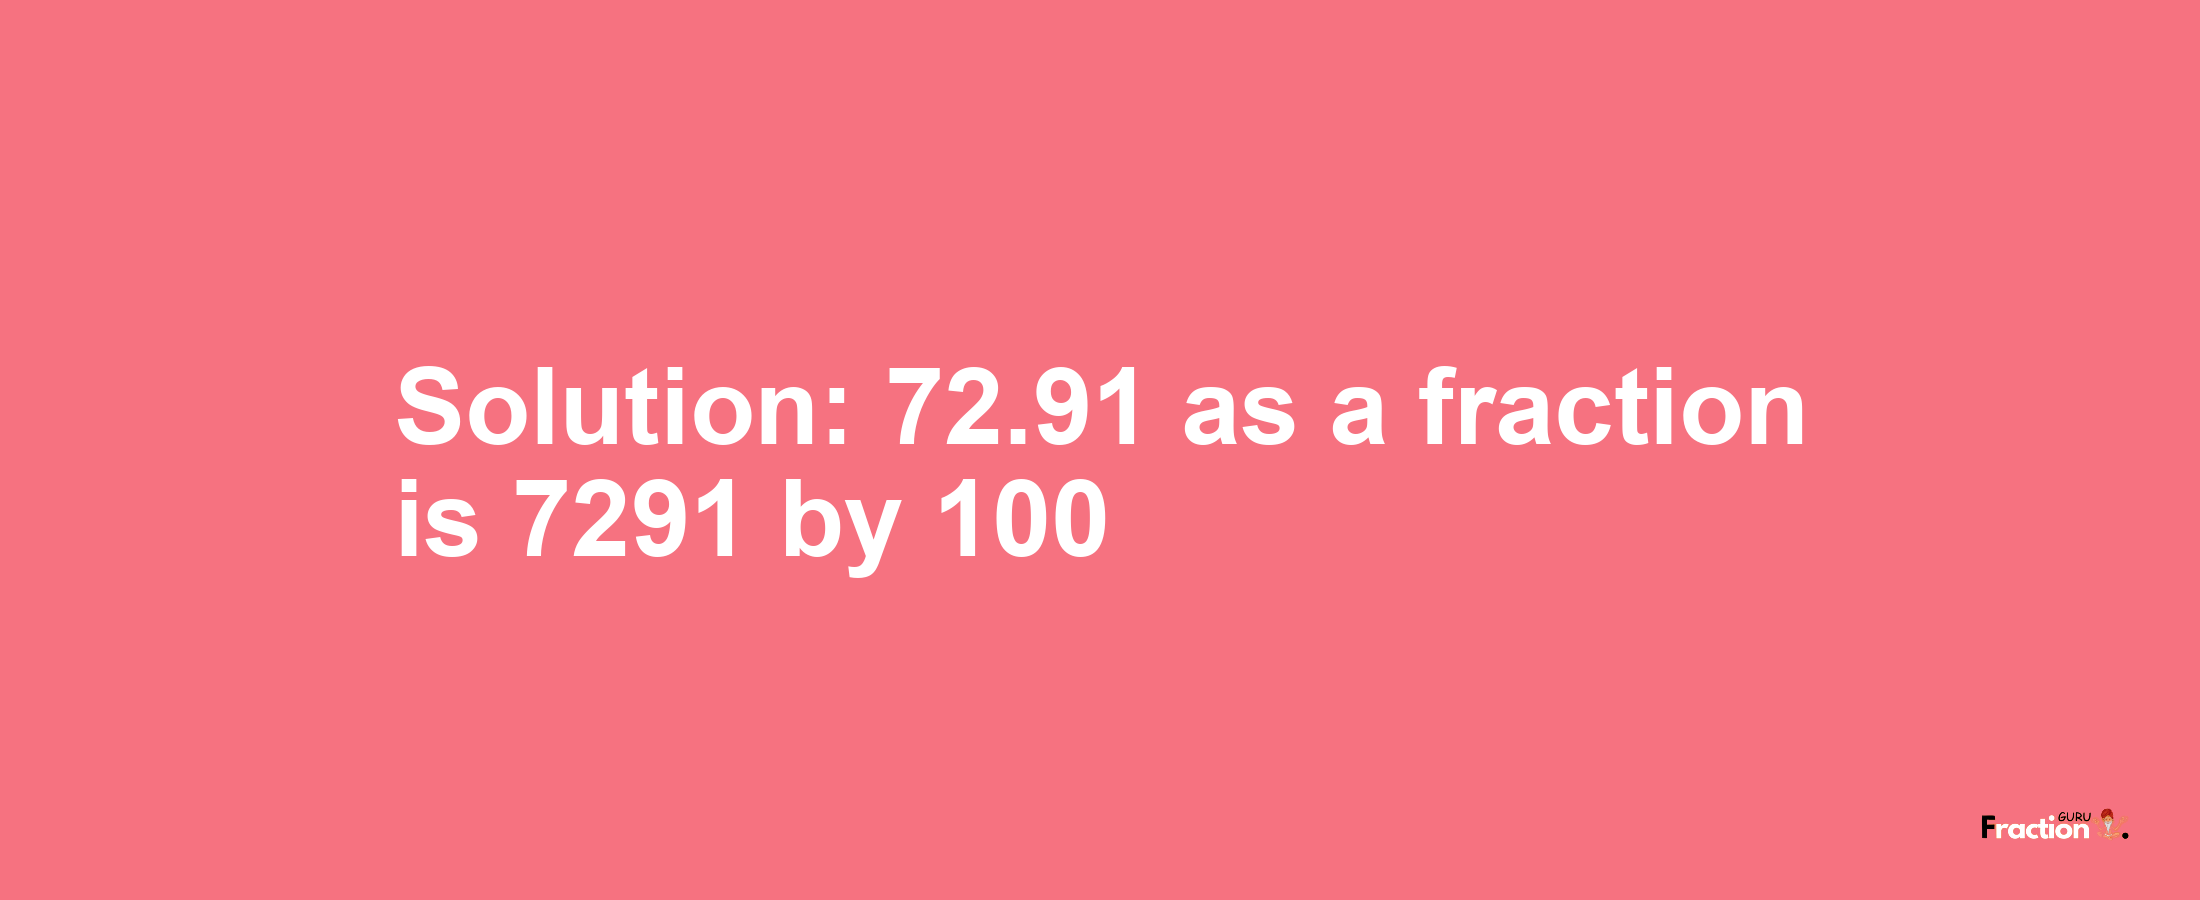 Solution:72.91 as a fraction is 7291/100